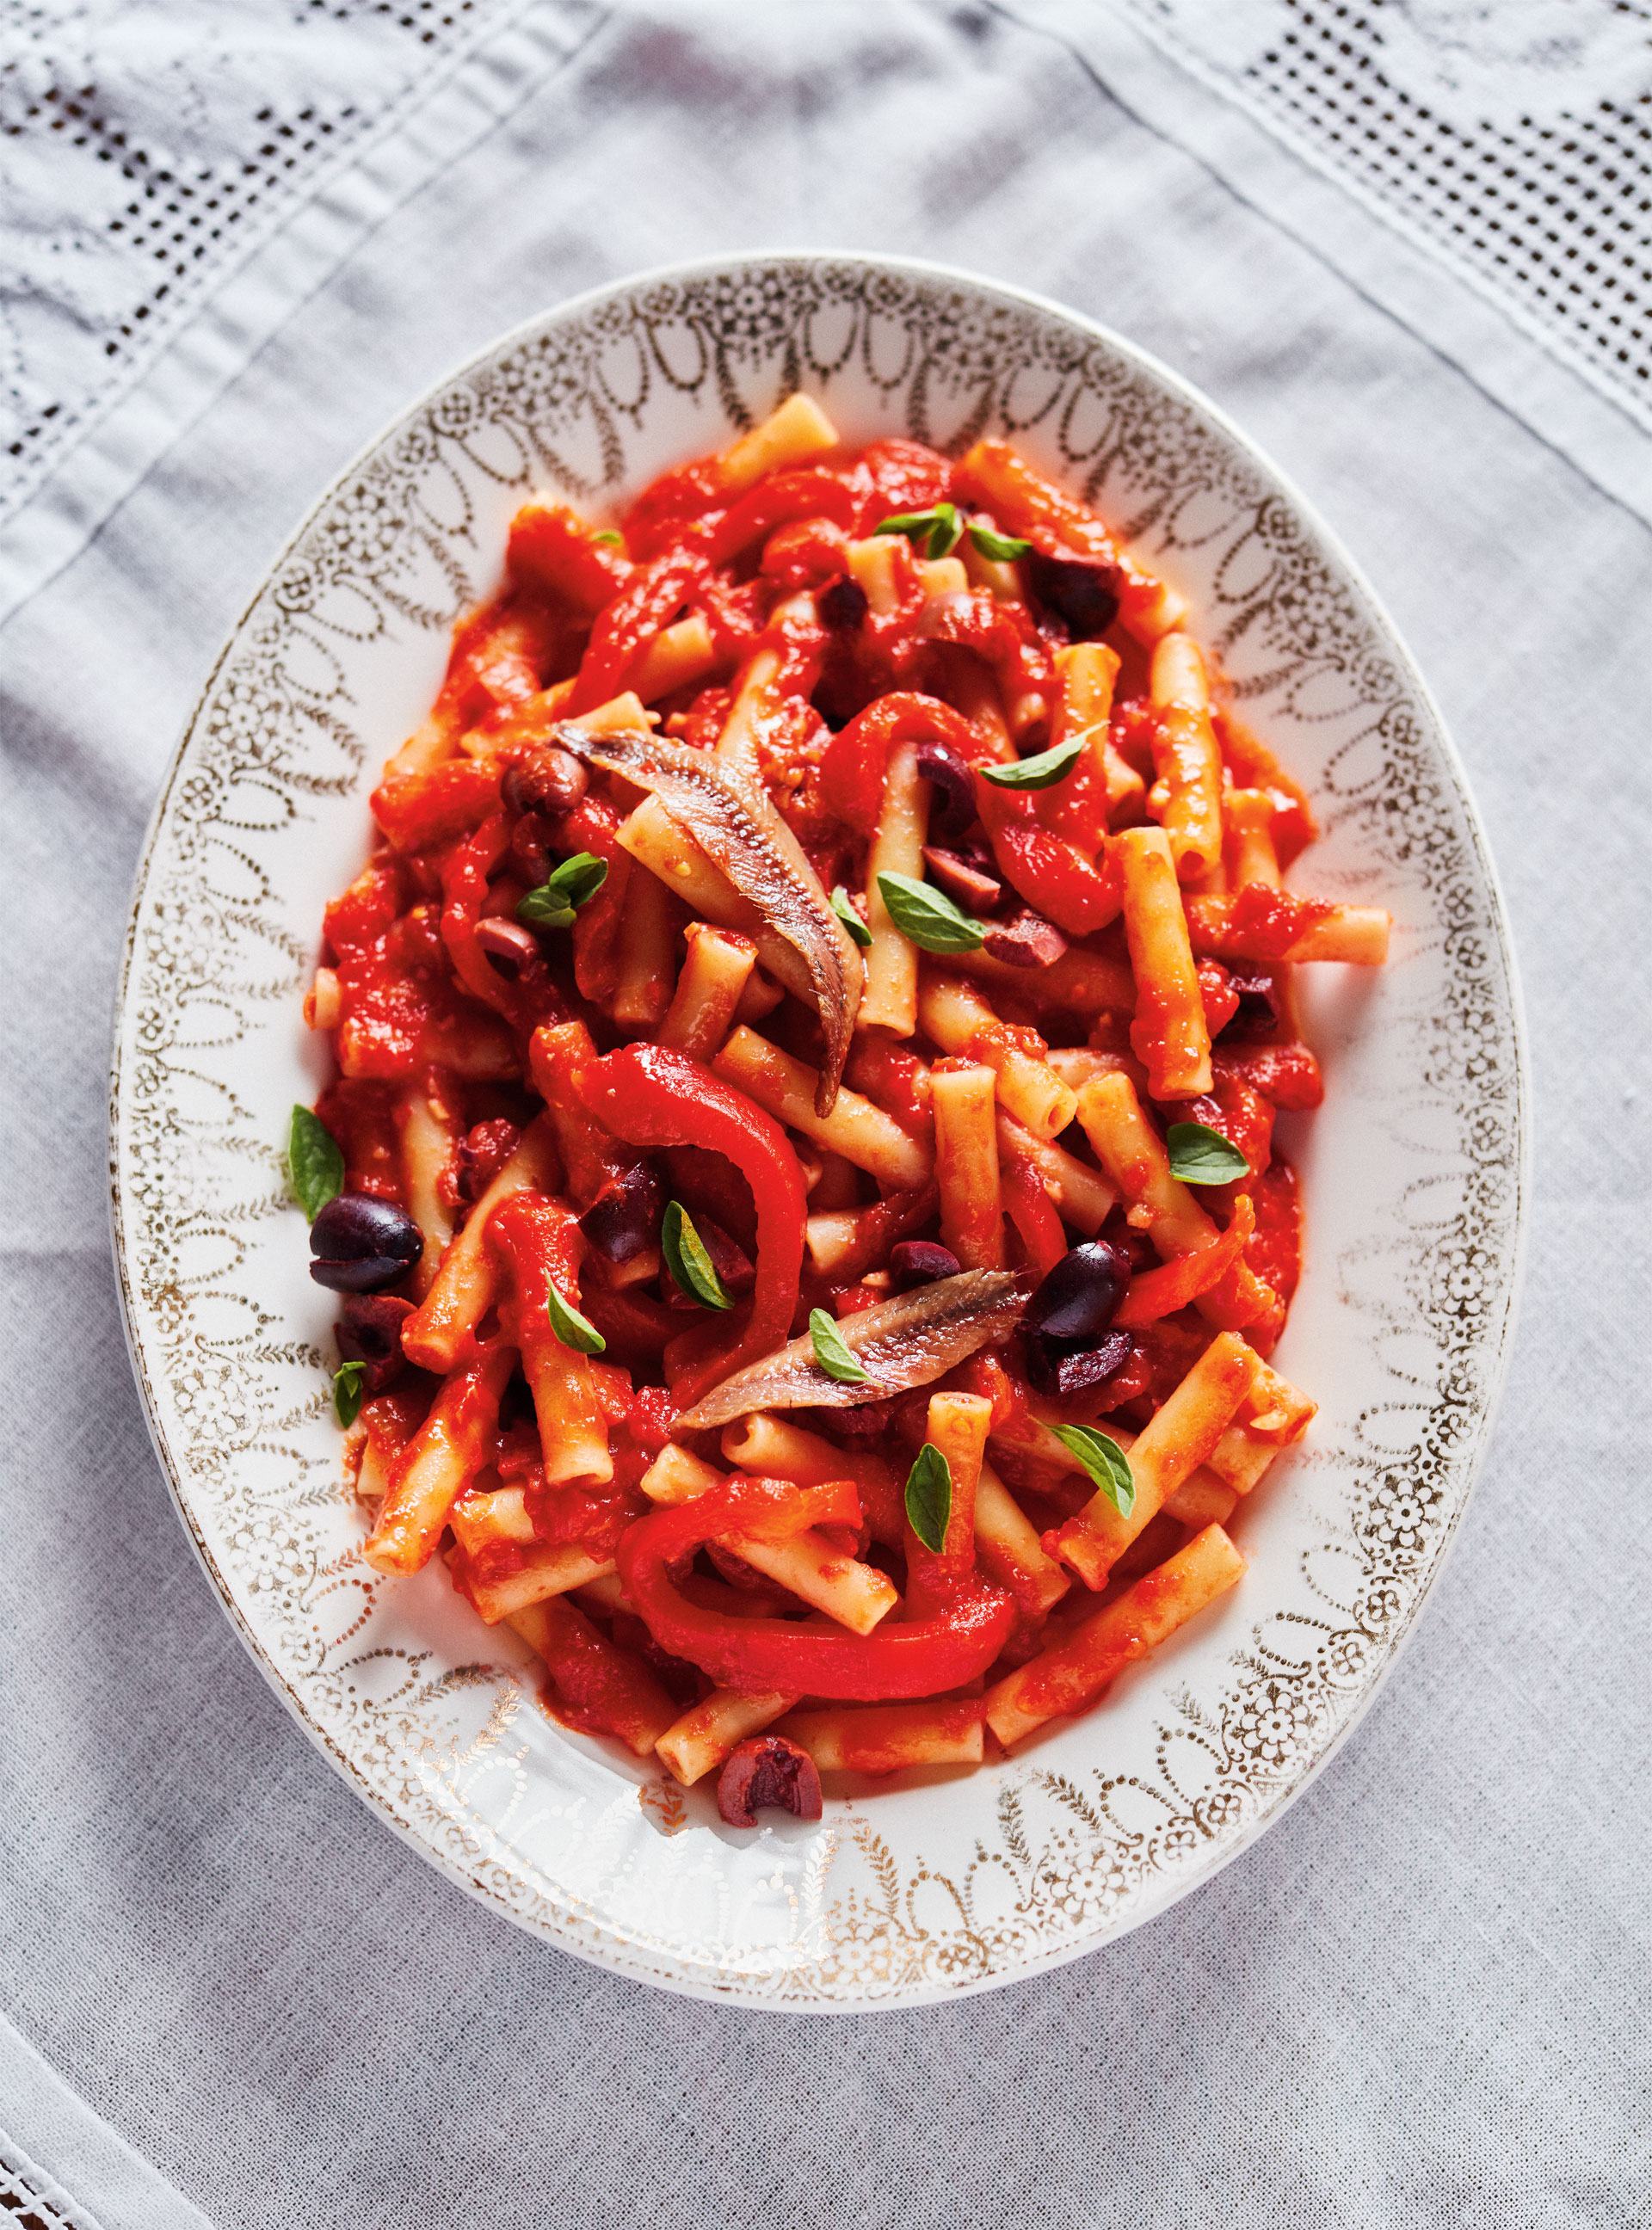 Ziti with Tomatoes and Roasted Bell Peppers (Zitie al Pomodoro e Pepperoni Arrostiti)